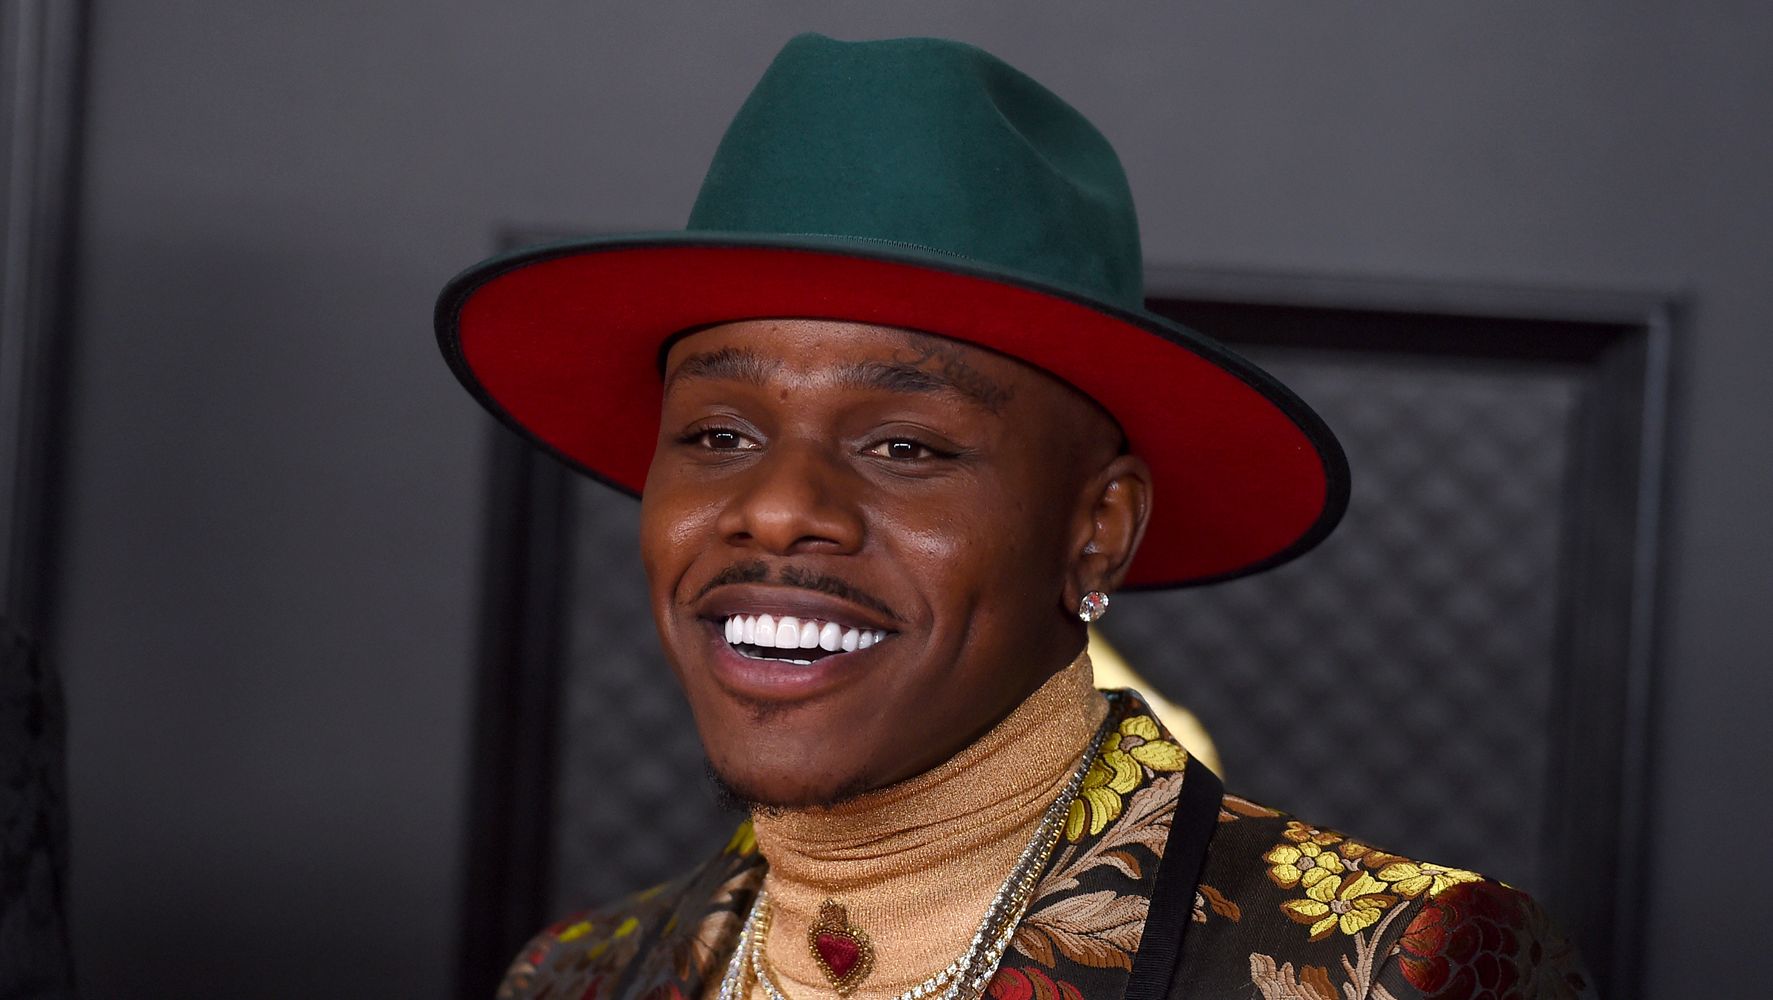 DaBaby Apologizes After More Music Festivals Drop Him Over Anti-LGBTQ Comments